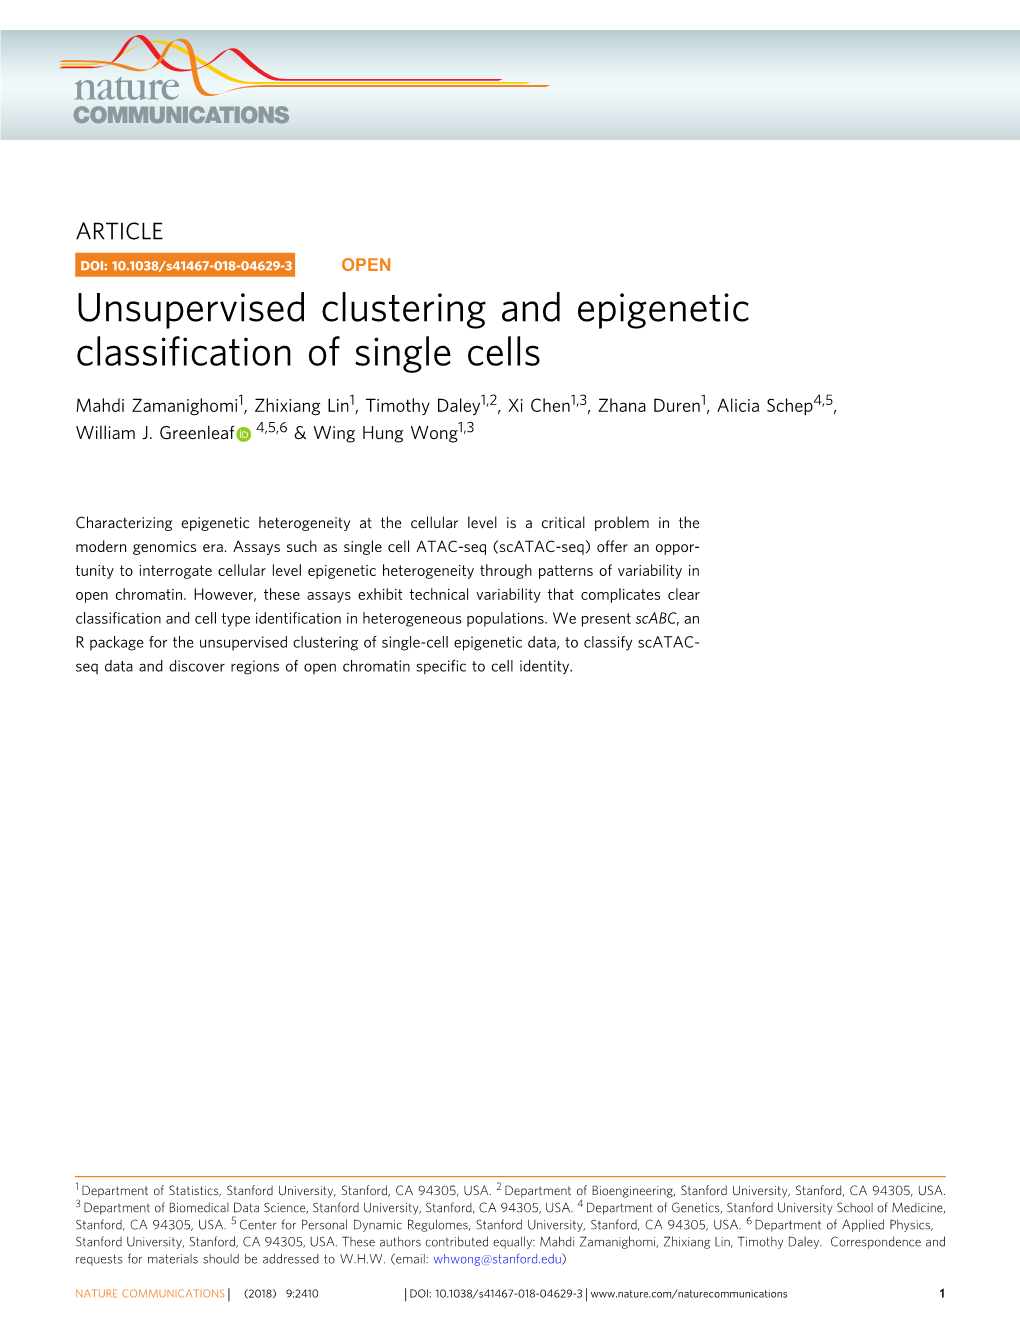 Unsupervised Clustering and Epigenetic Classification of Single Cells